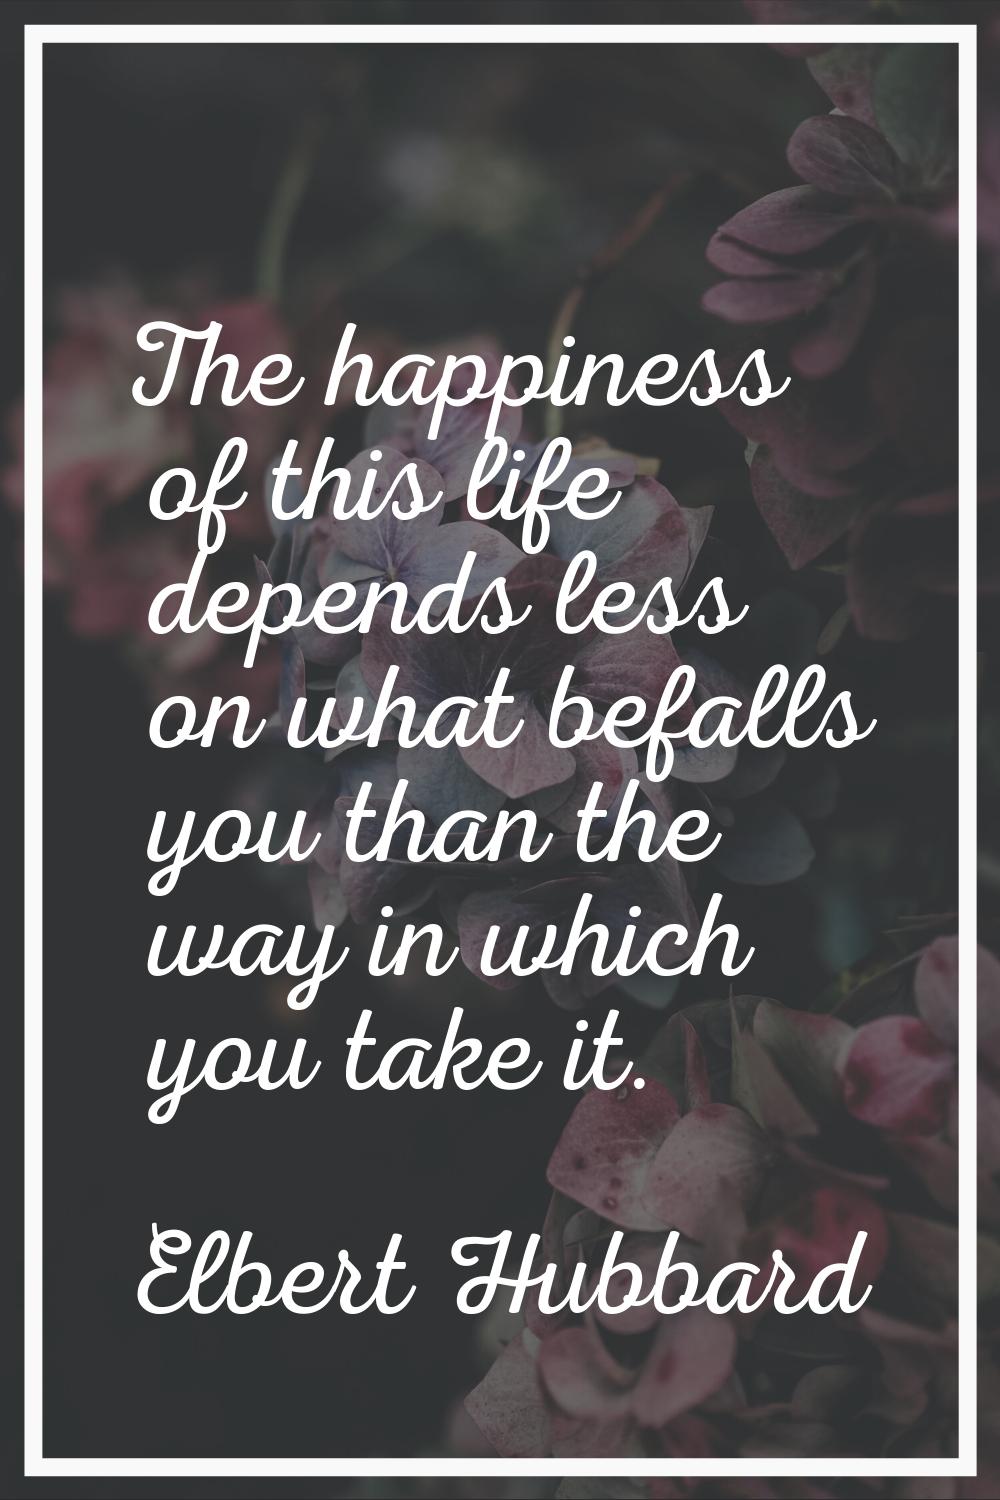 The happiness of this life depends less on what befalls you than the way in which you take it.